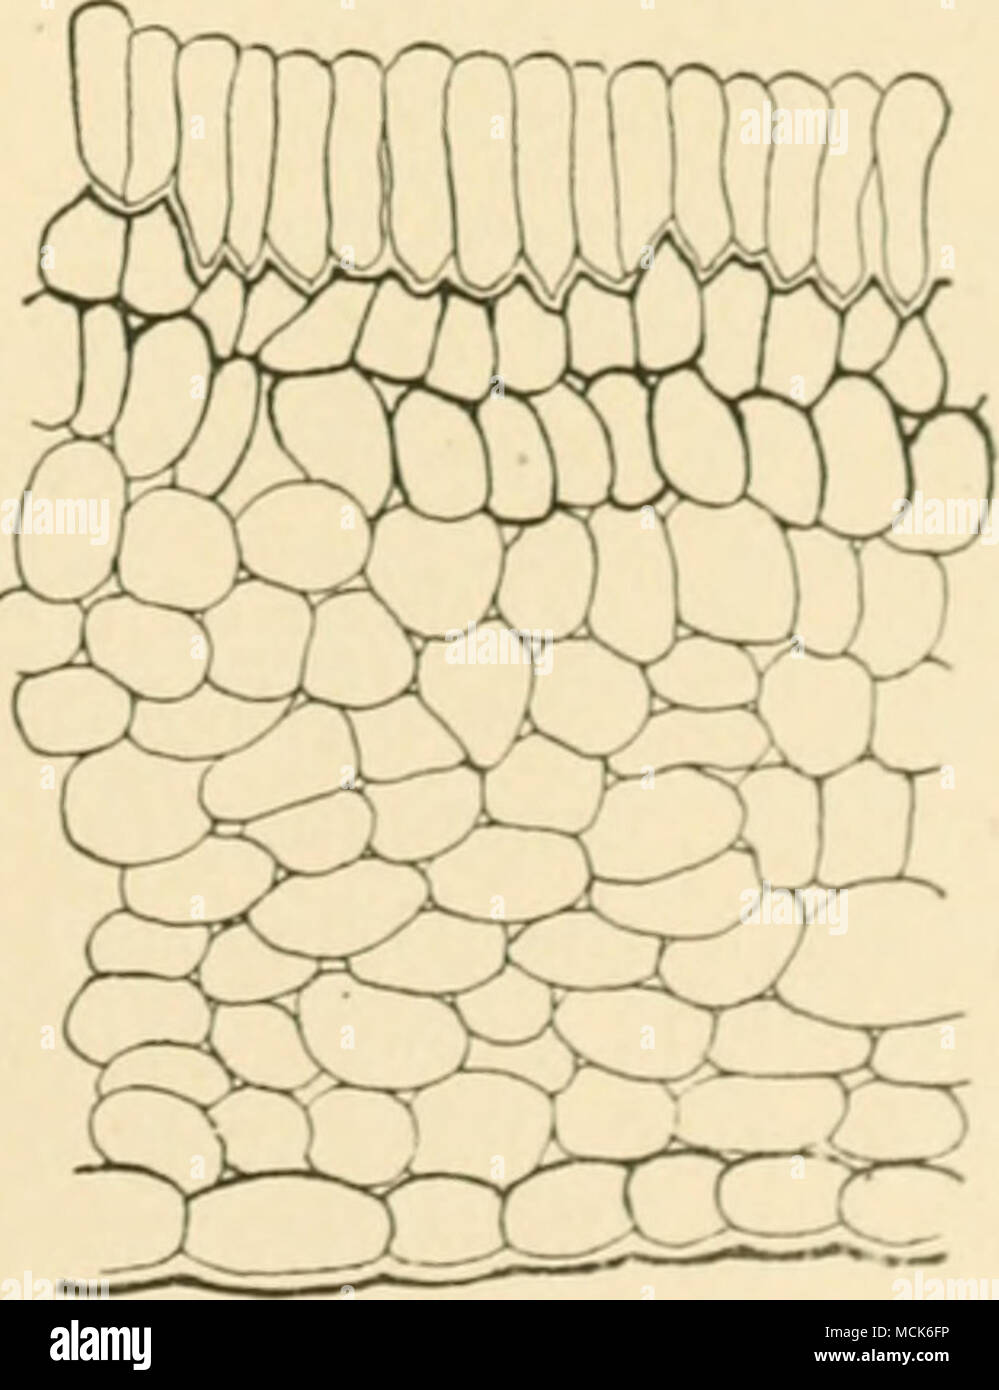 . Fn^. 00.- Section of leaf hypertrophied by attack of Exooncus cameus; the asci of the fungus coat the upper epidermi.s. Dmwn with the same magnification as Fig. 6-0, for comparison. (After W. G. Smith.) Stock Photo